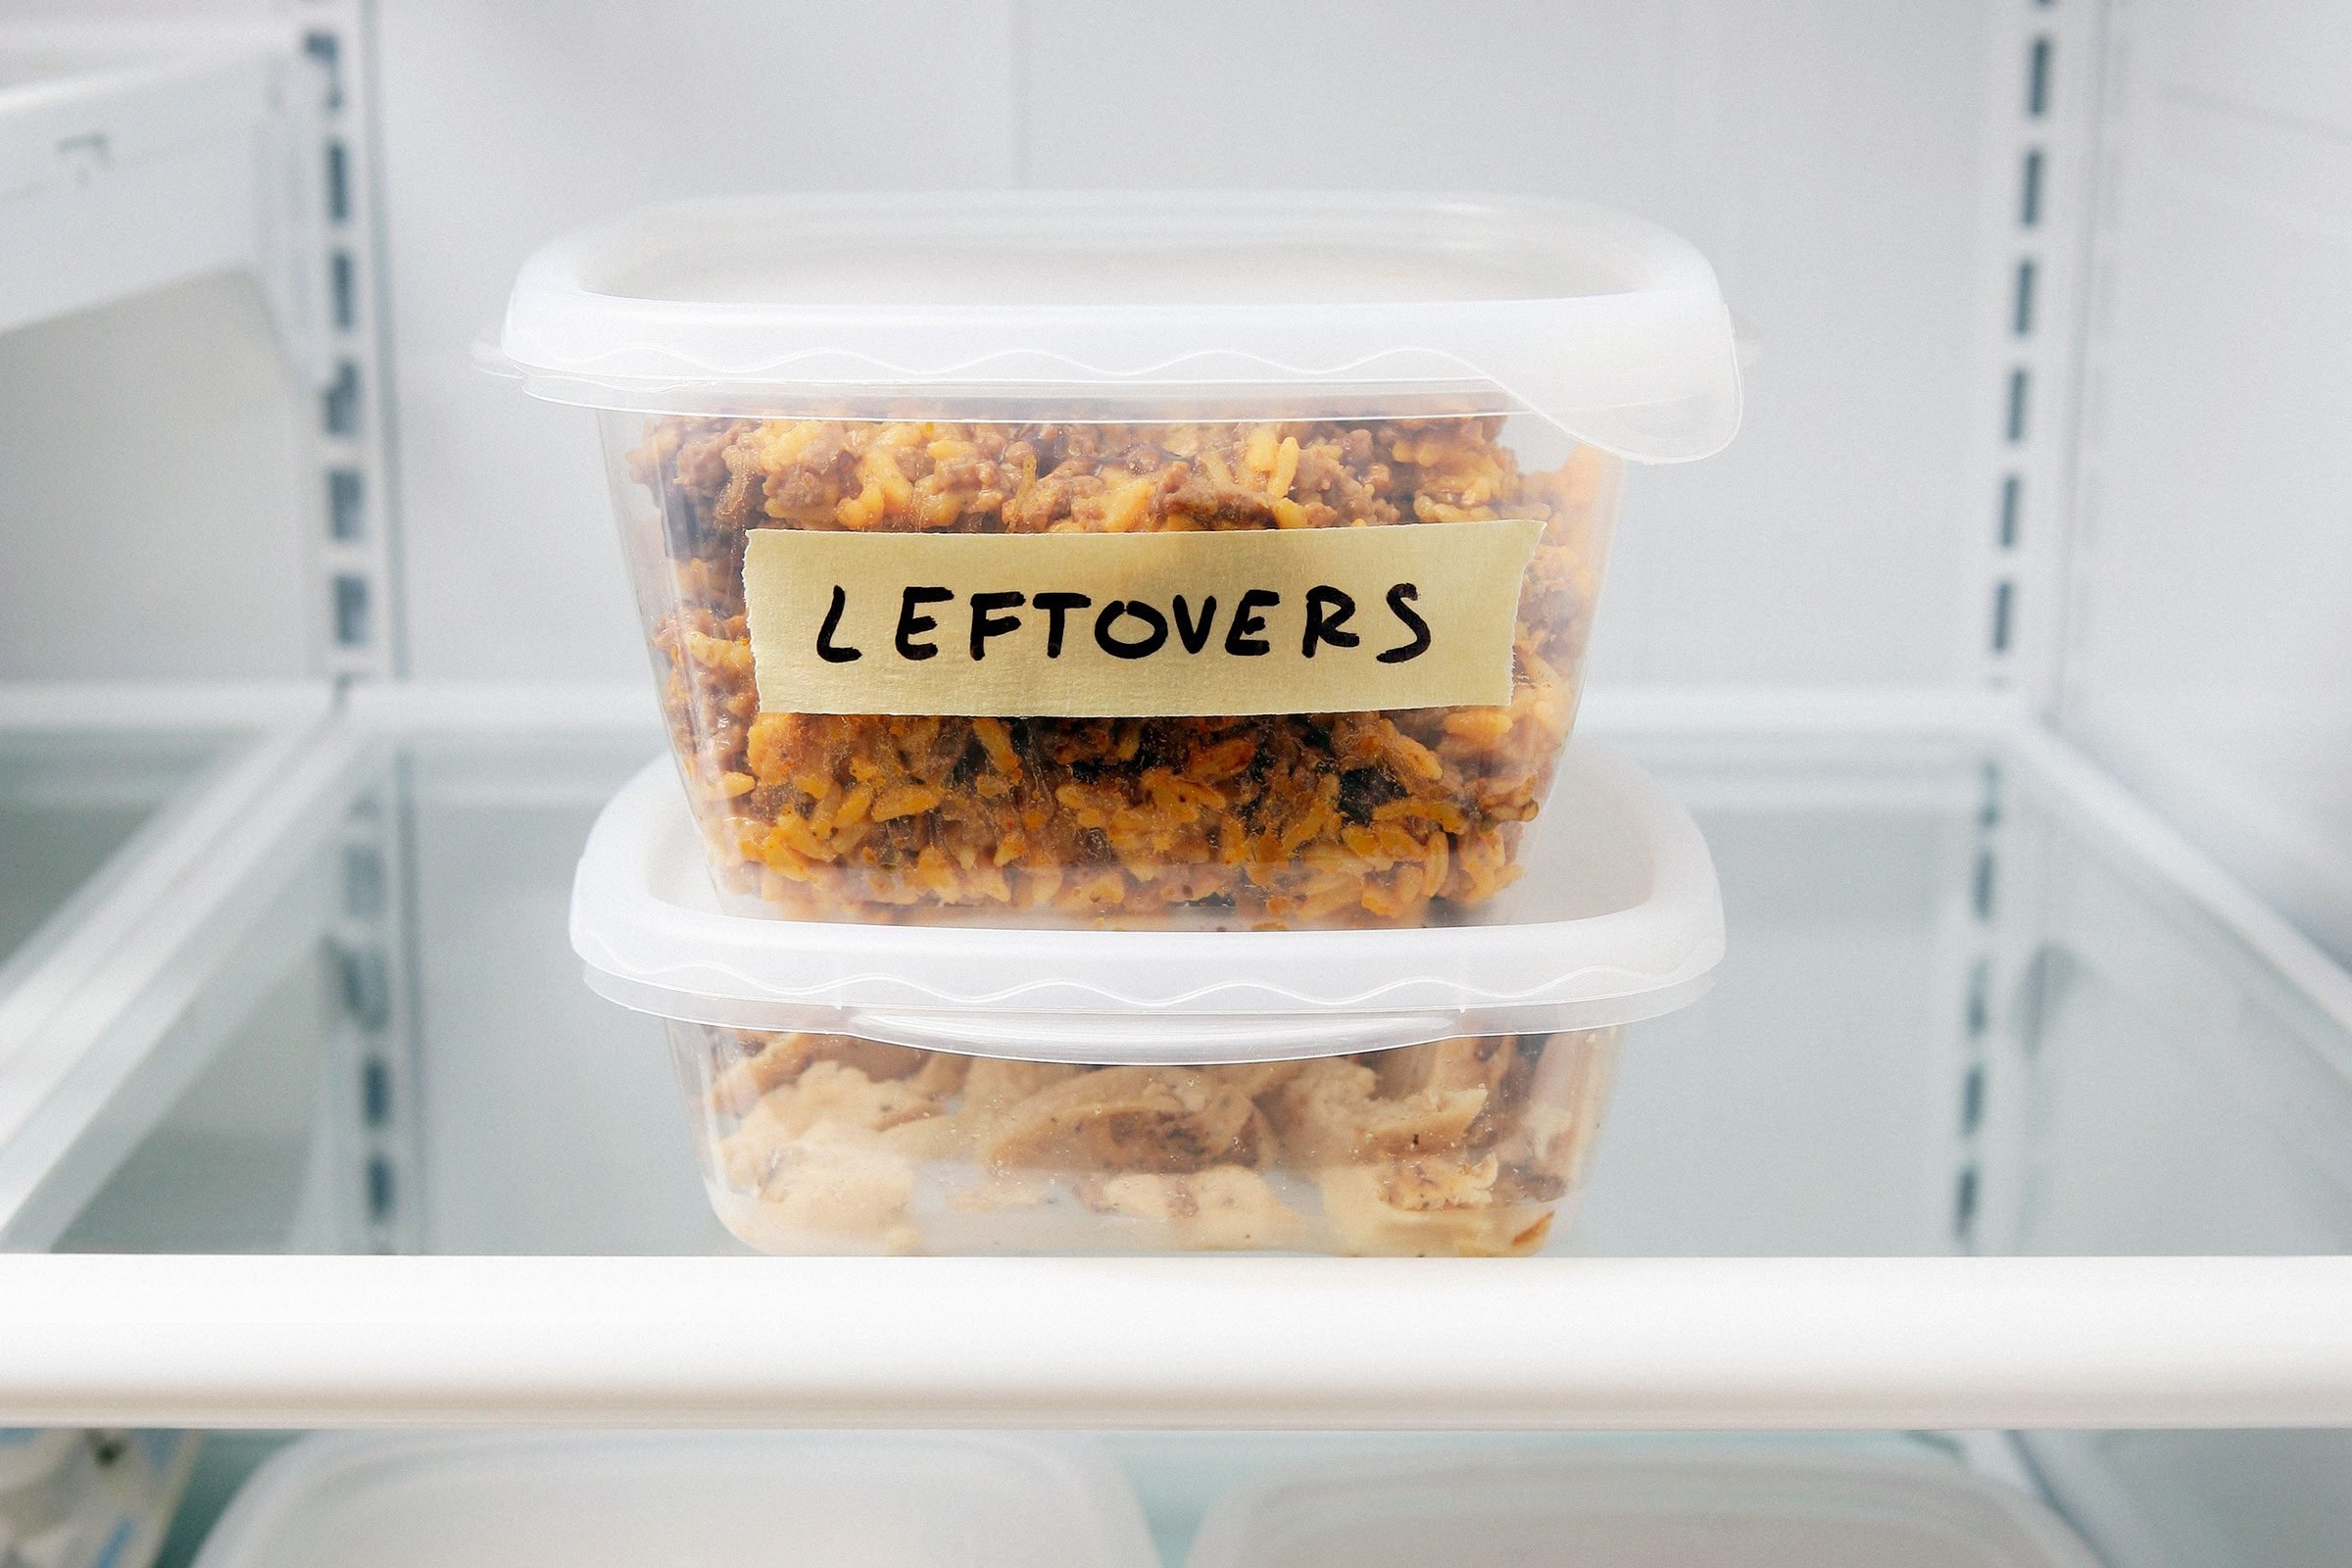 https://www.rd.com/wp-content/uploads/2022/10/leftovers-in-the-fridge-GettyImages-96322287.jpg